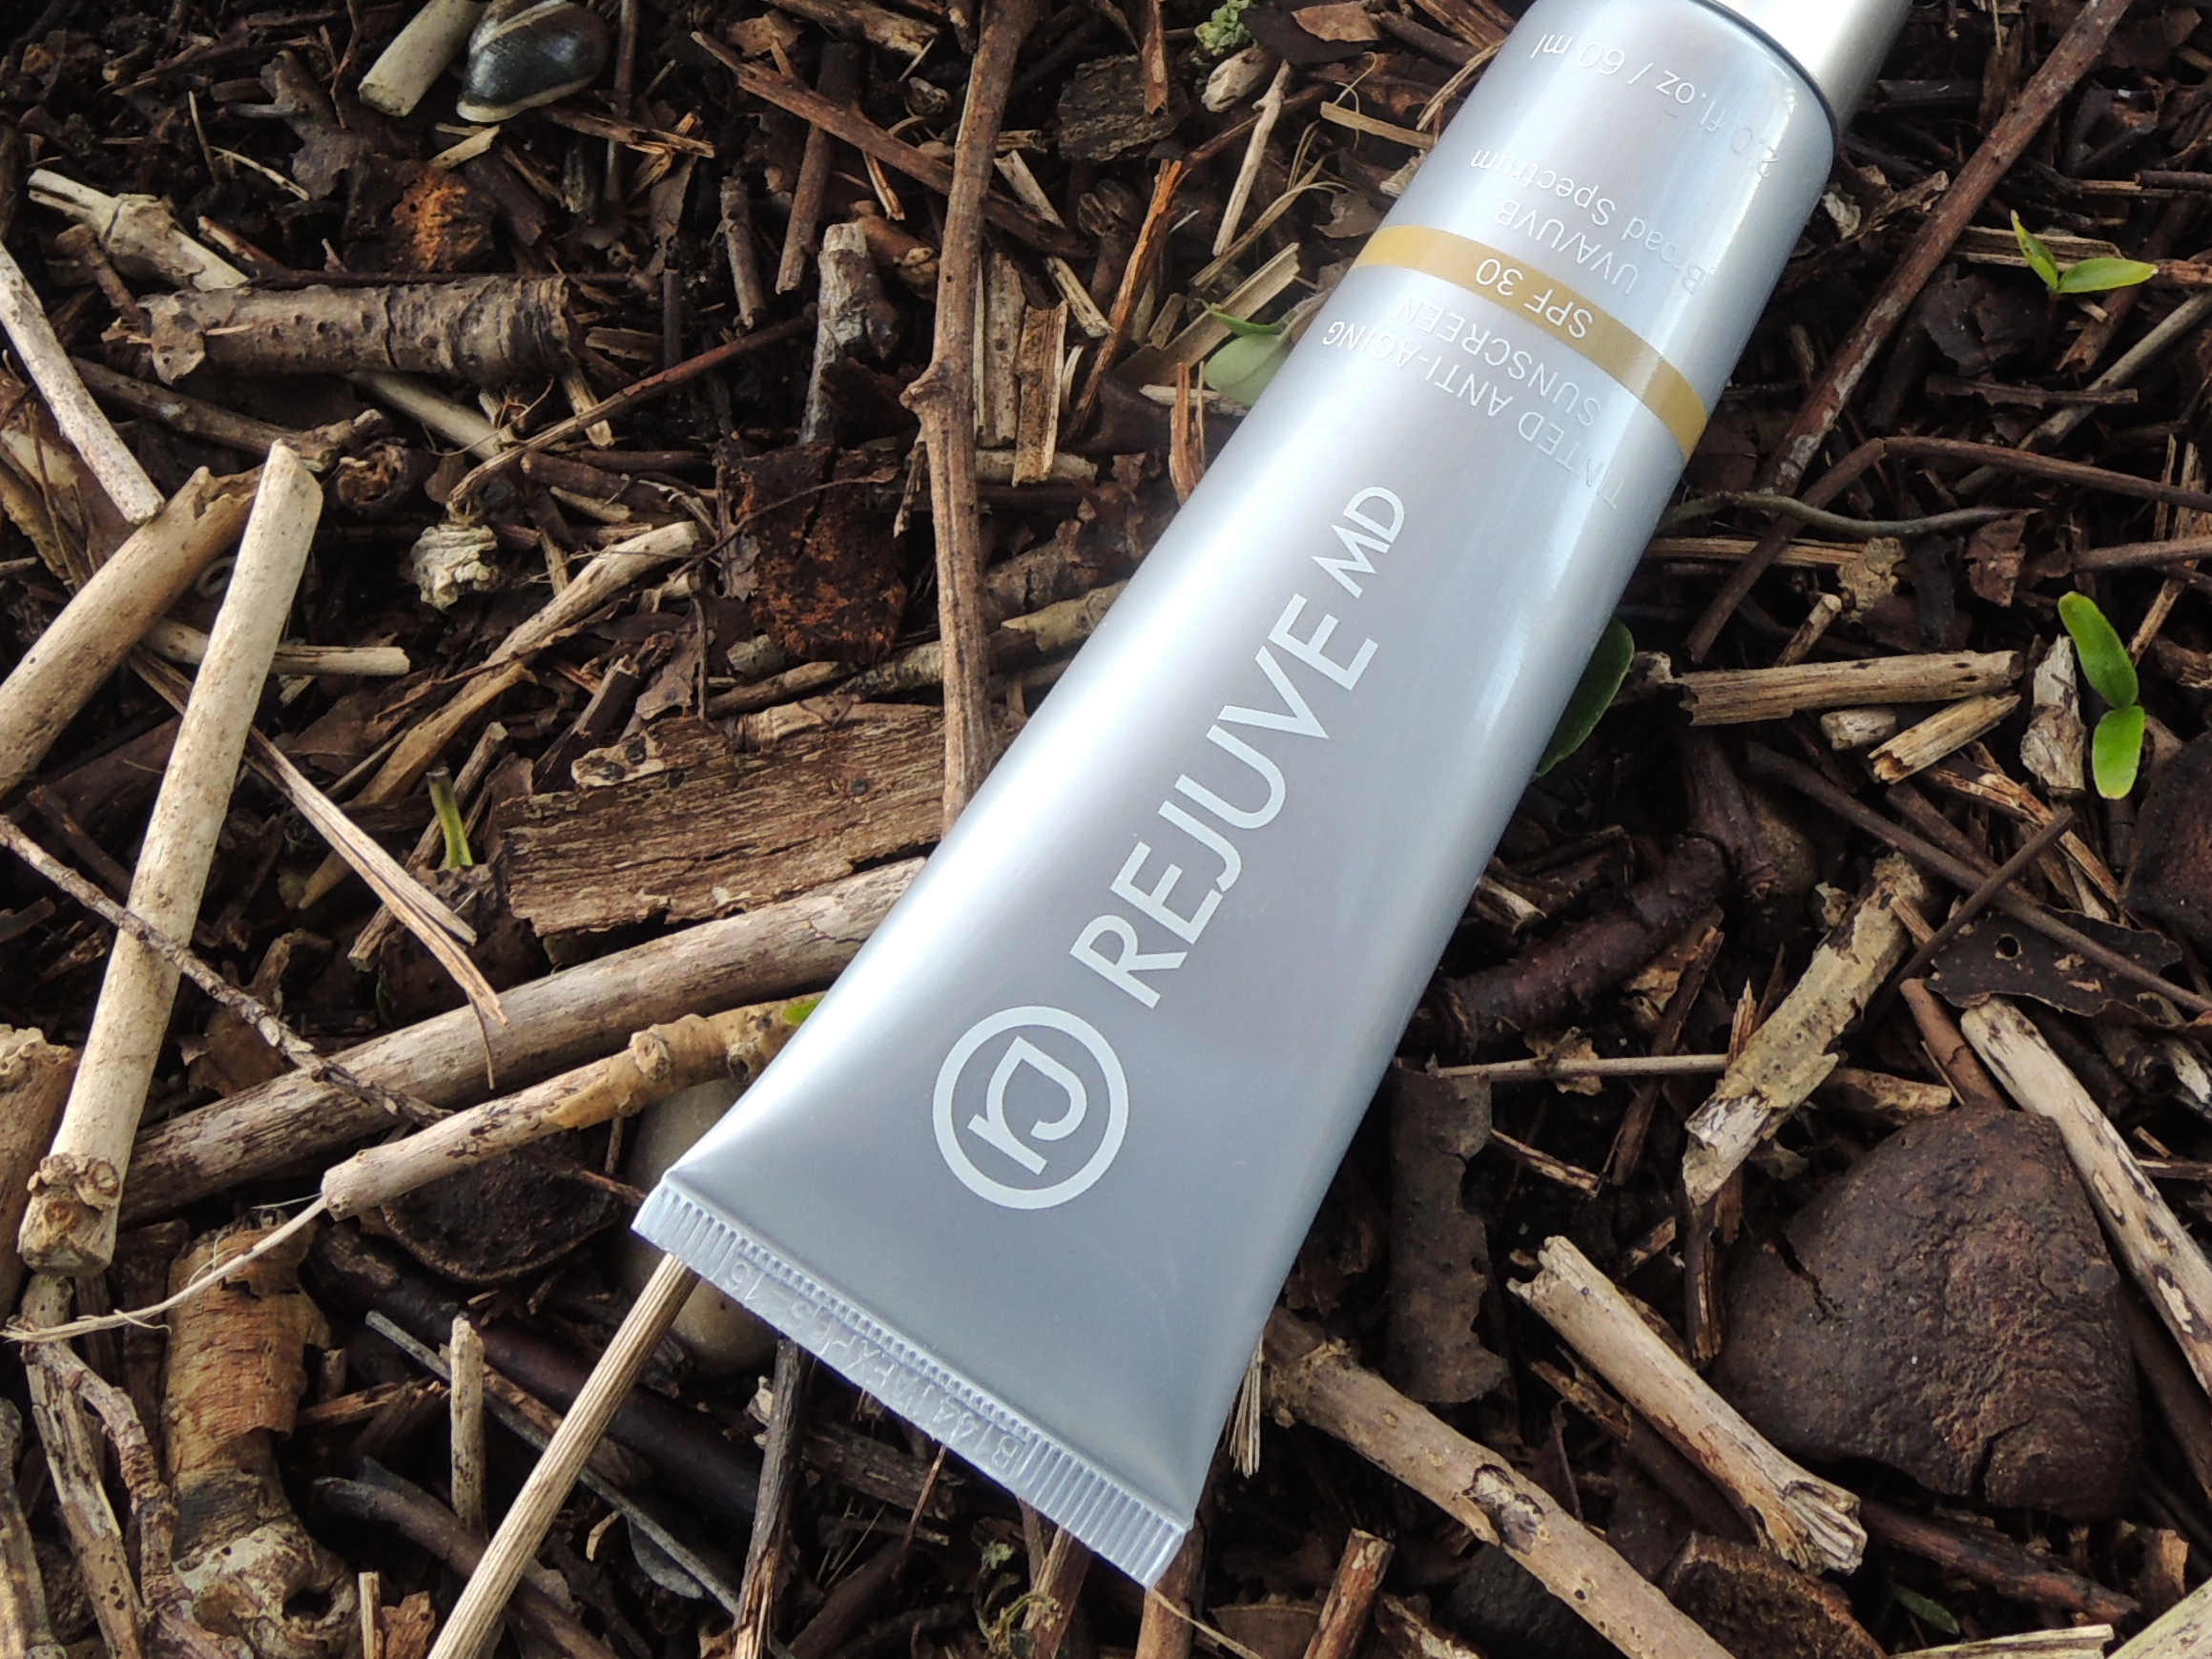 Rejuve MD Tinted Anti-Aging Sunscreen Review.